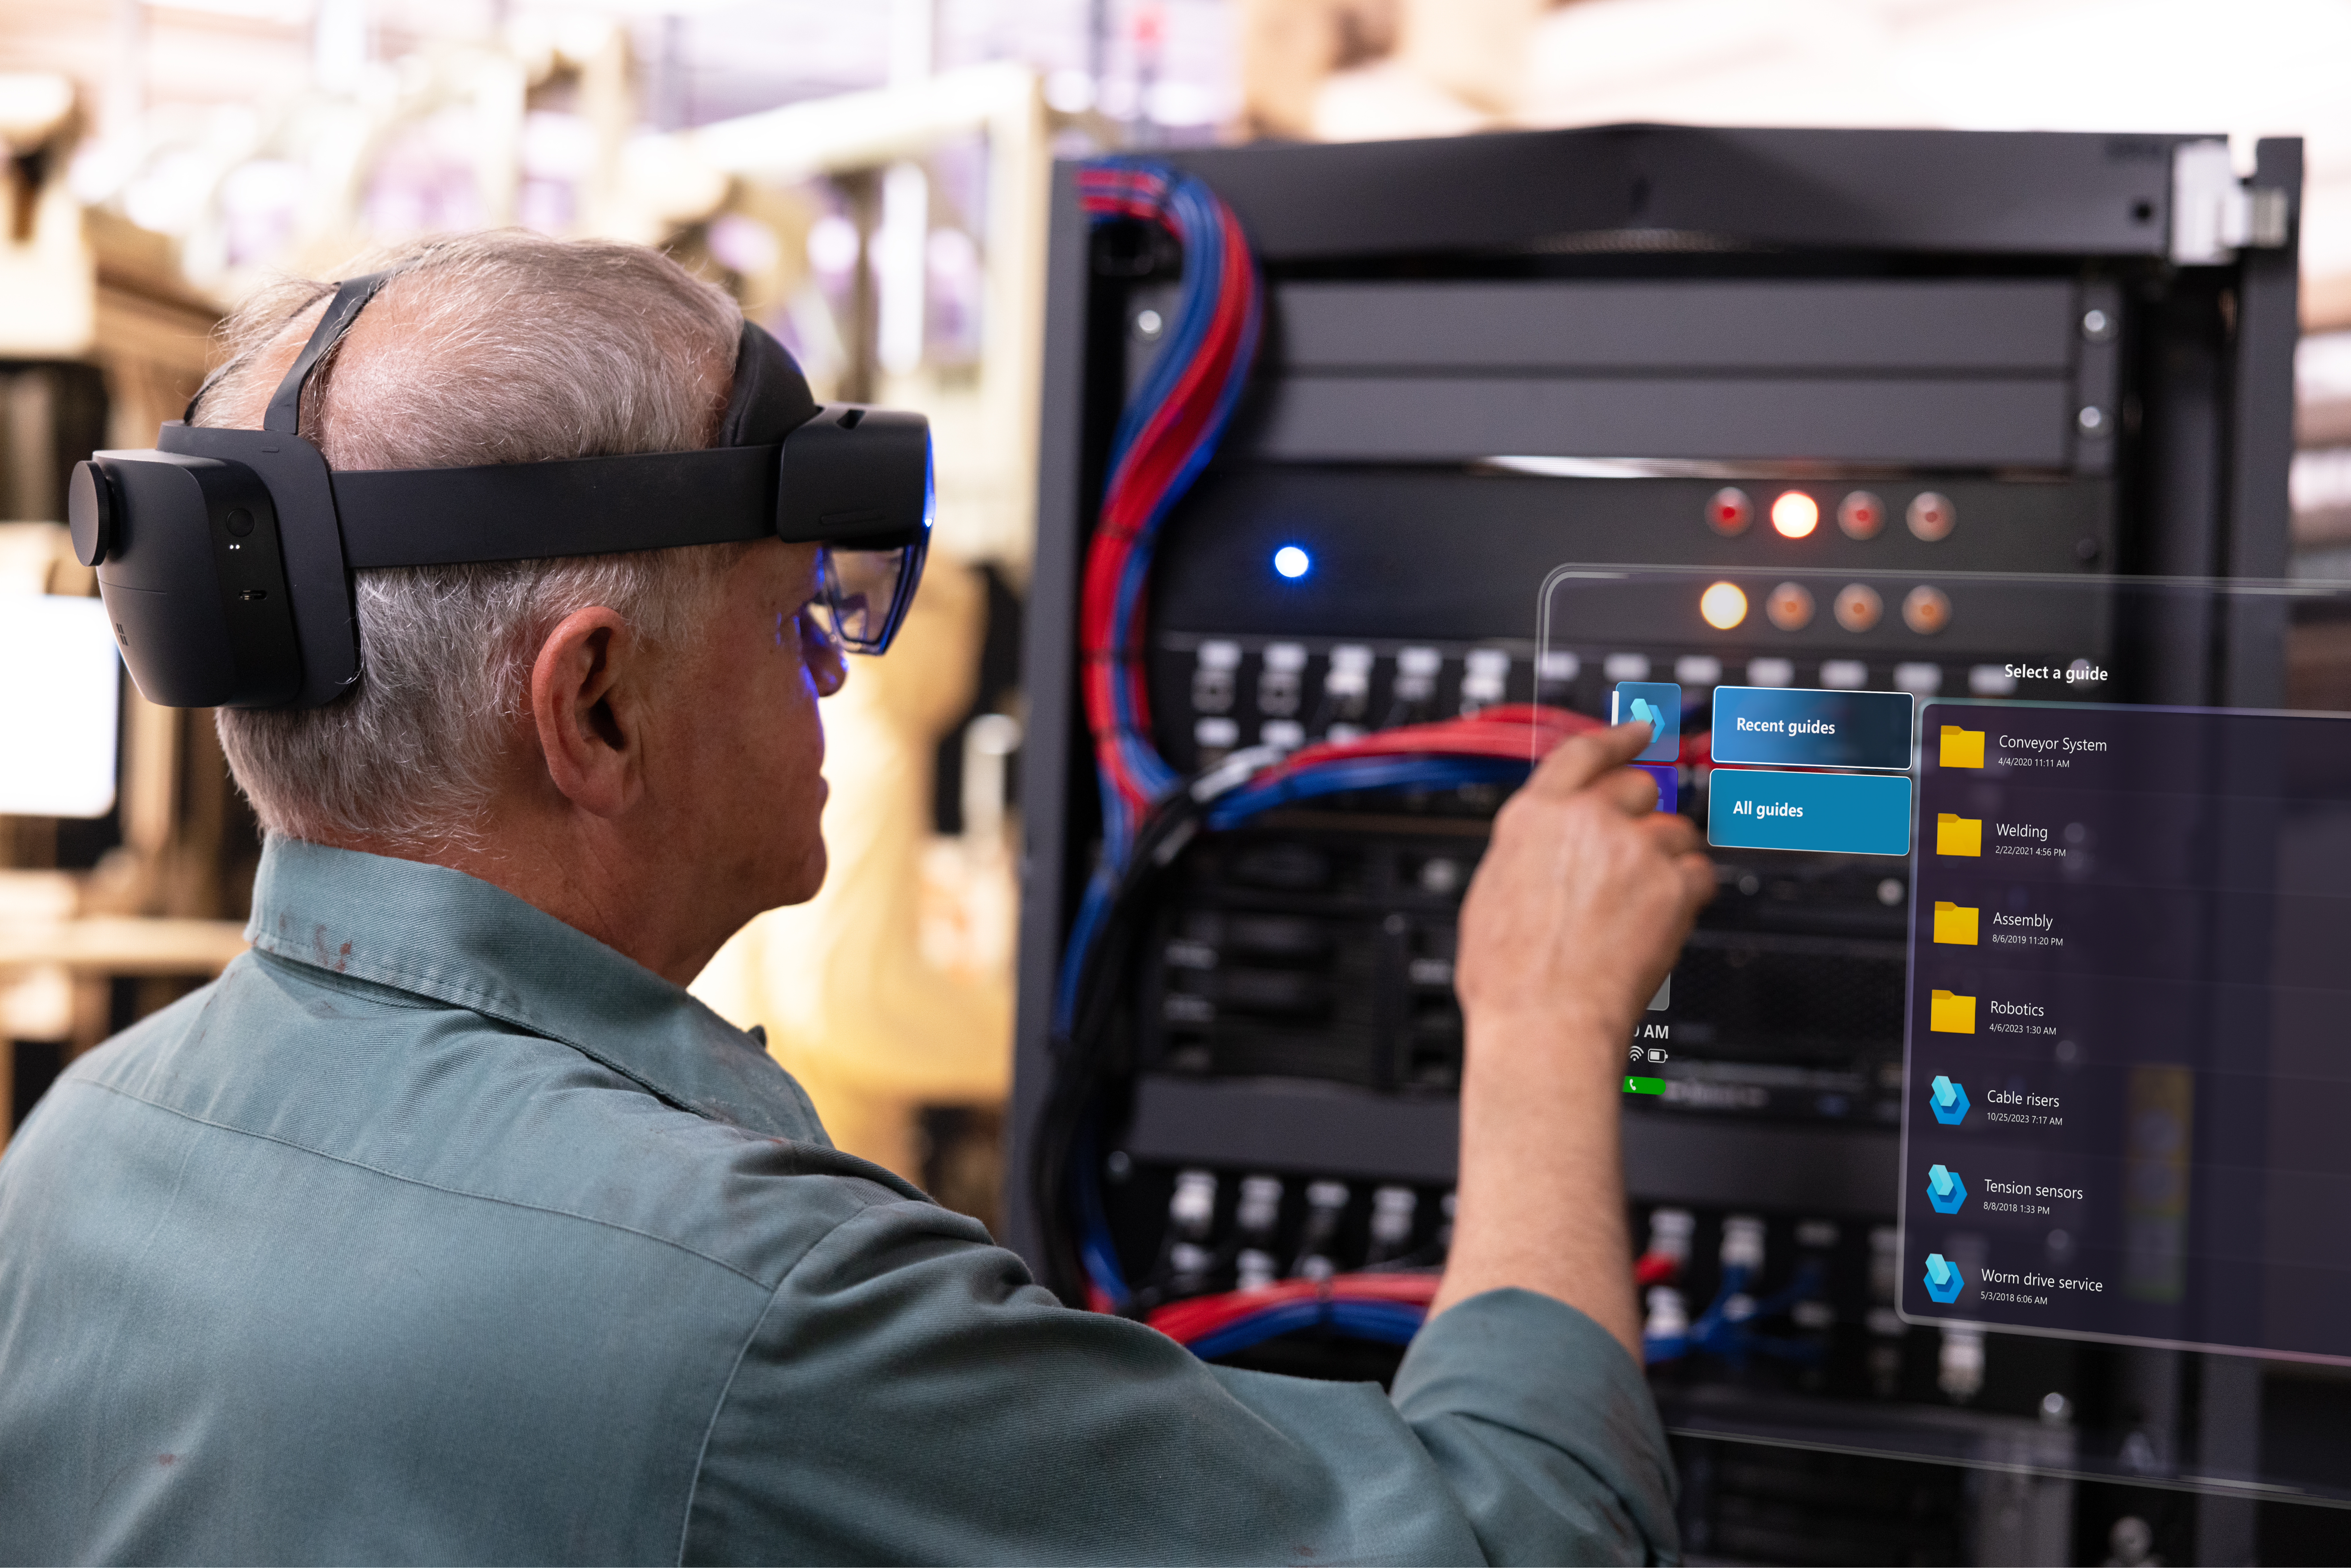 Photo of a person operating a guide in the HoloLens app.